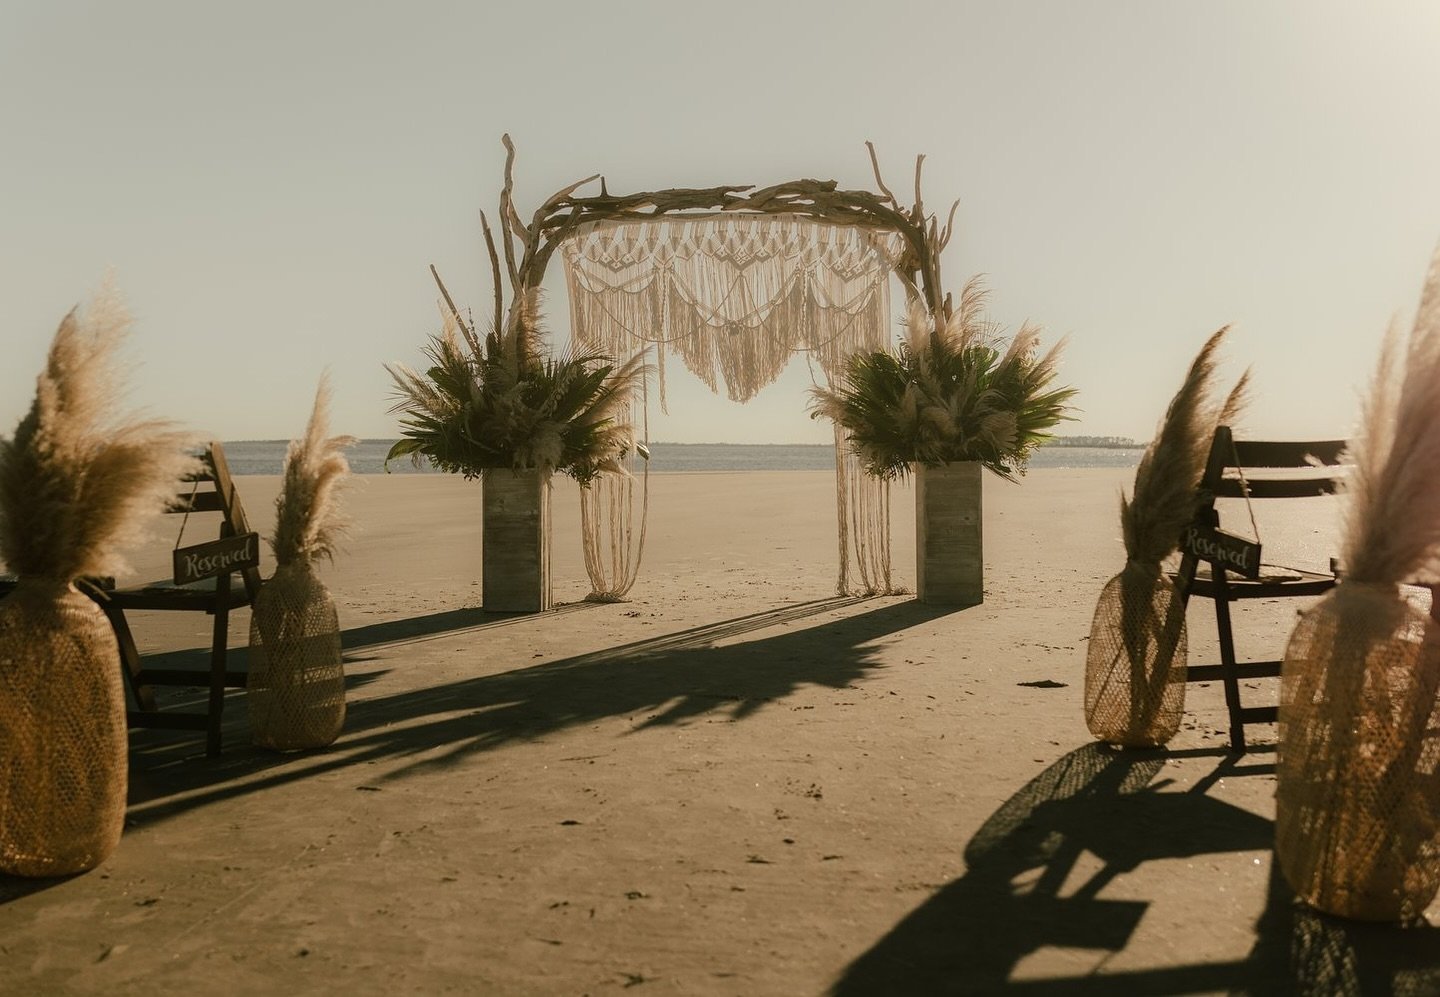 driftwood and pampas is a match made in heaven, just like #iandbcouple TORI + NIKKI 🤍

Looking for your wedding or event florals? Hit the link in our bio to get in touch!! 🔗✨

VENDORS⬇️
couple: @victoriabos @nikkibos17
photography: @frykmanphotogra